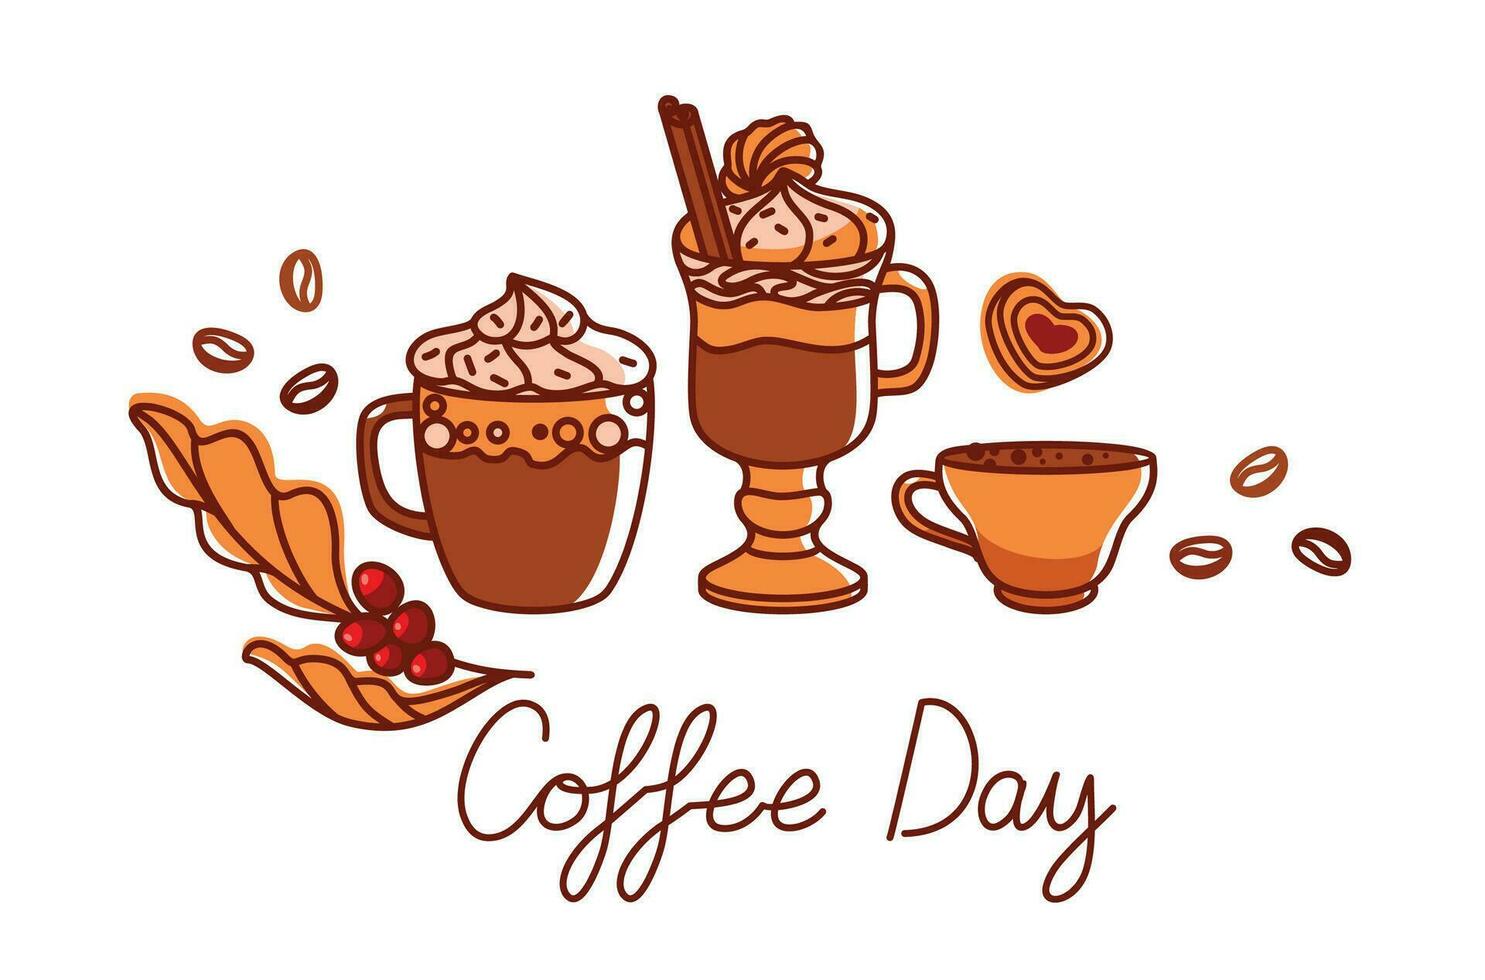 Cezve, coffee pot and various types of coffee. International coffee day banner. Coffee day banner. Vector